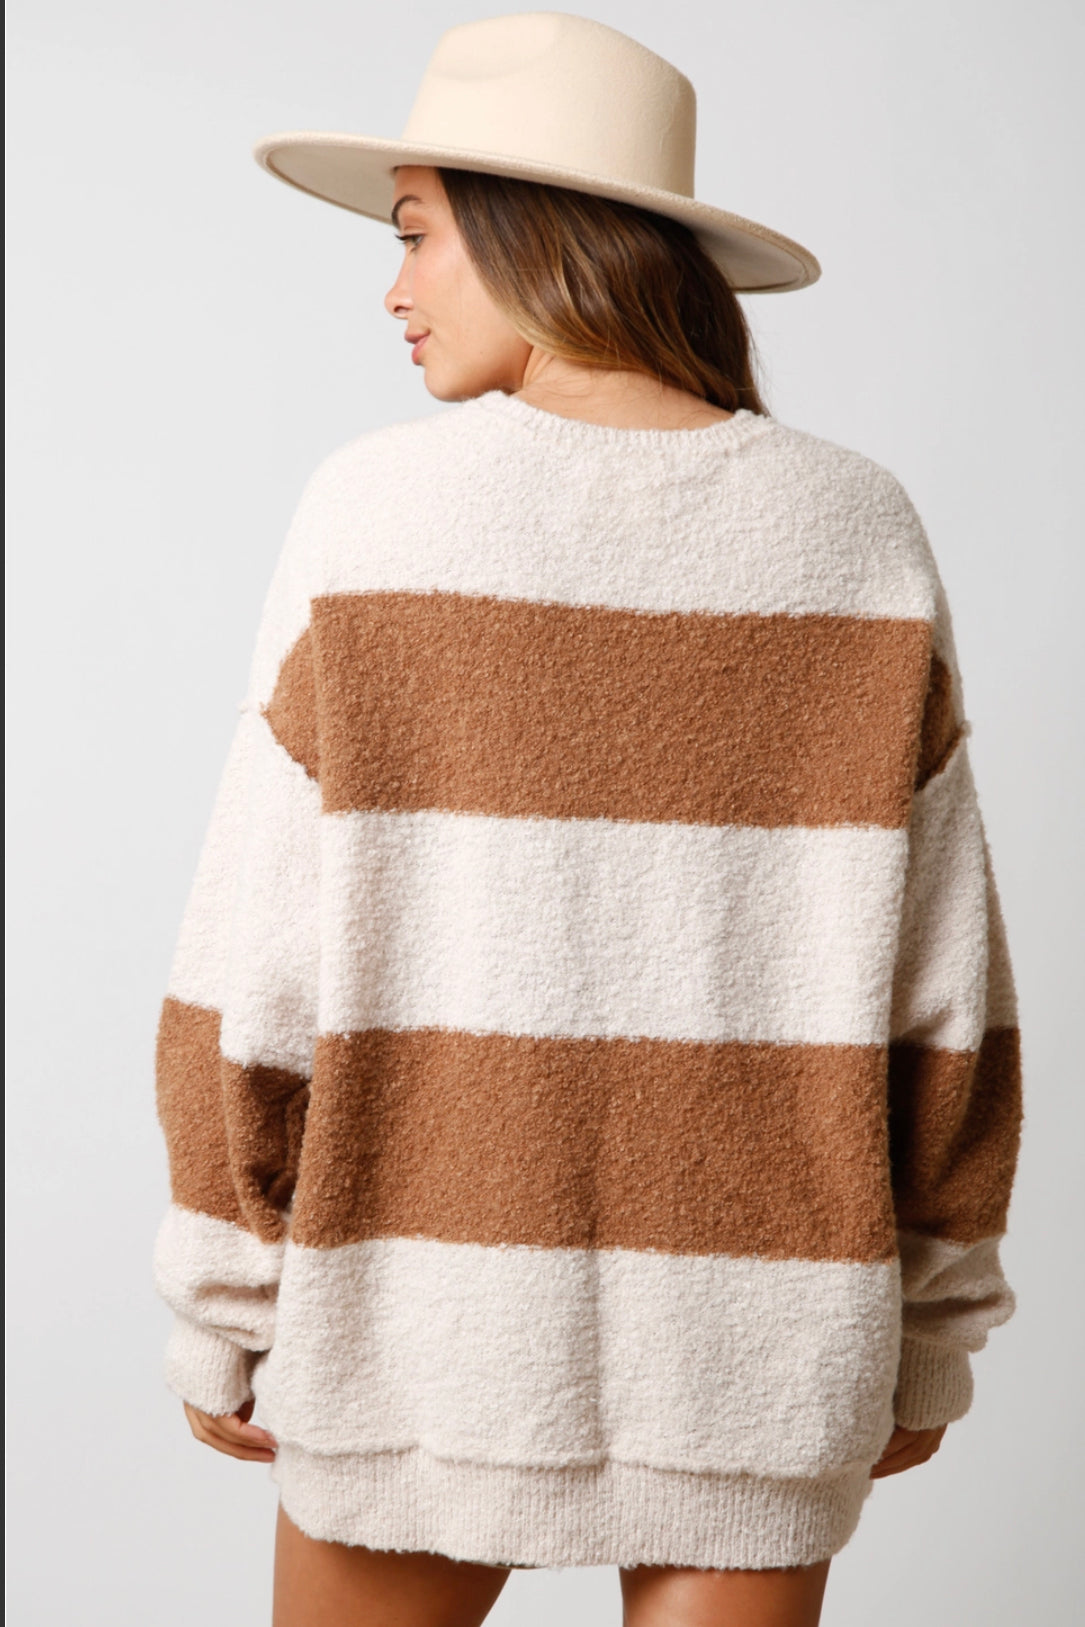 Toasty Hearth Stripped Sweater